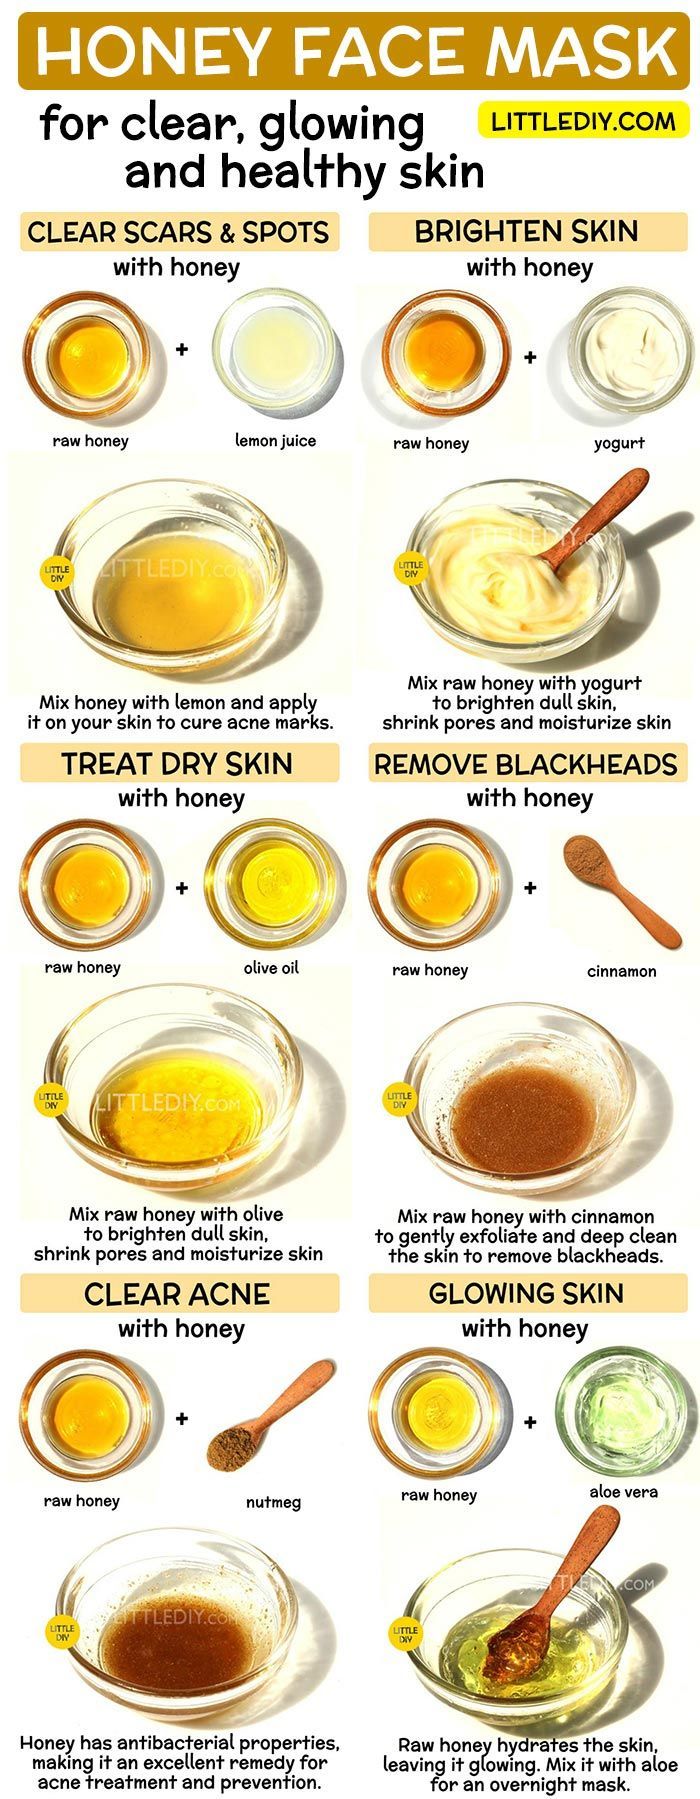 HONEY FACE MASKS for clear, bright and glowing skin - LITTLE DIY - HONEY FACE MASKS for clear, bright and glowing skin - LITTLE DIY -   16 beauty Care face ideas